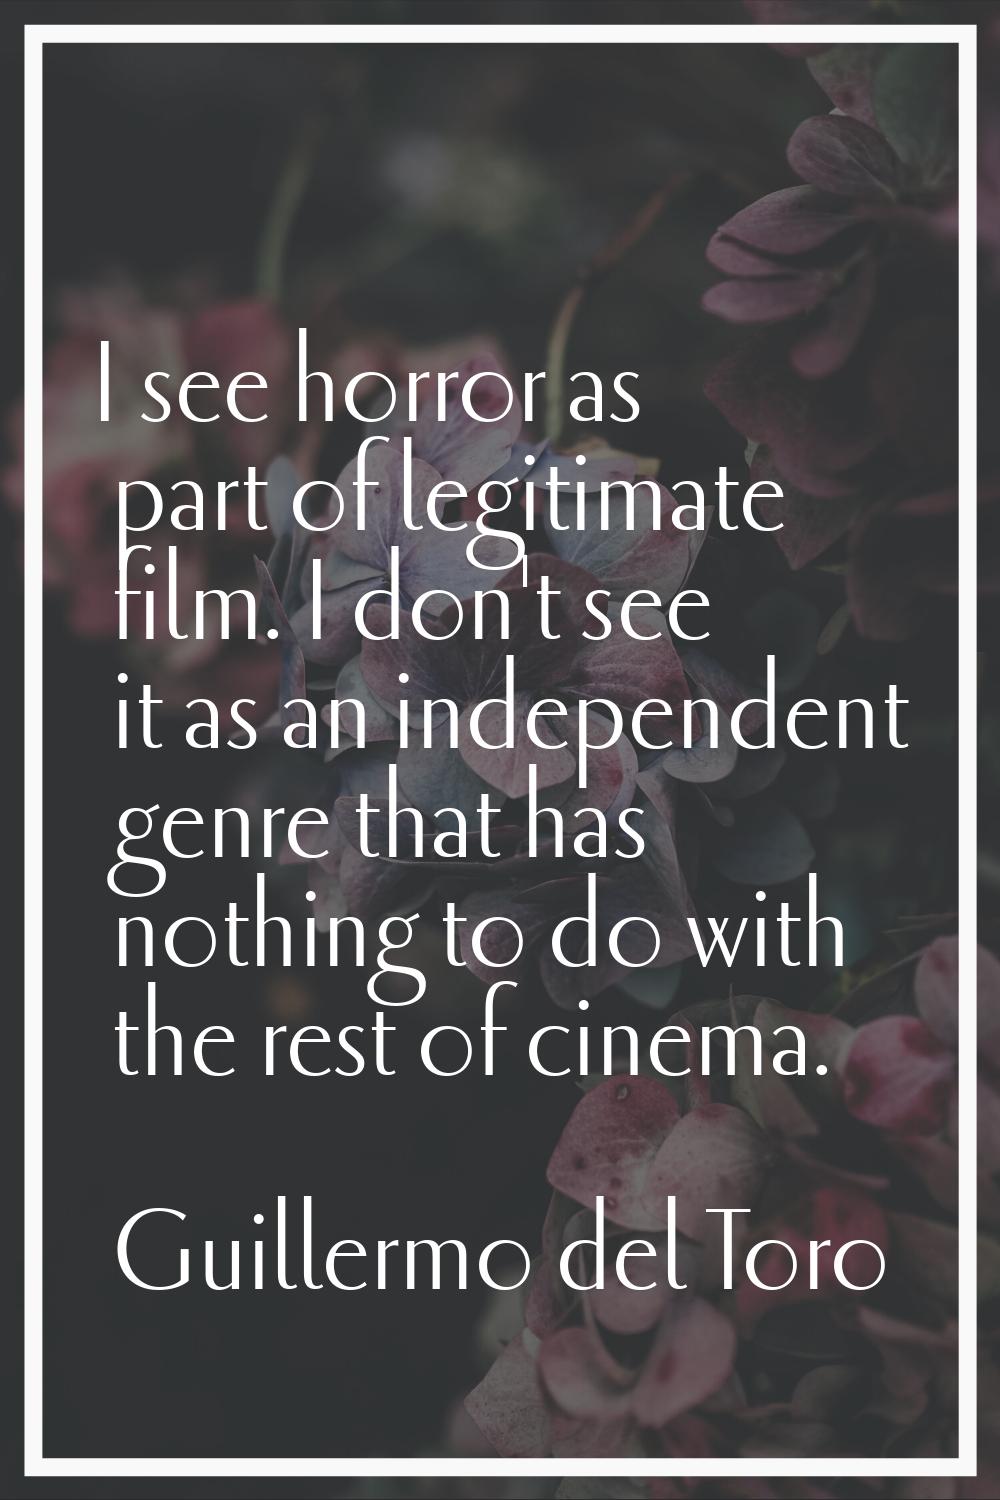 I see horror as part of legitimate film. I don't see it as an independent genre that has nothing to